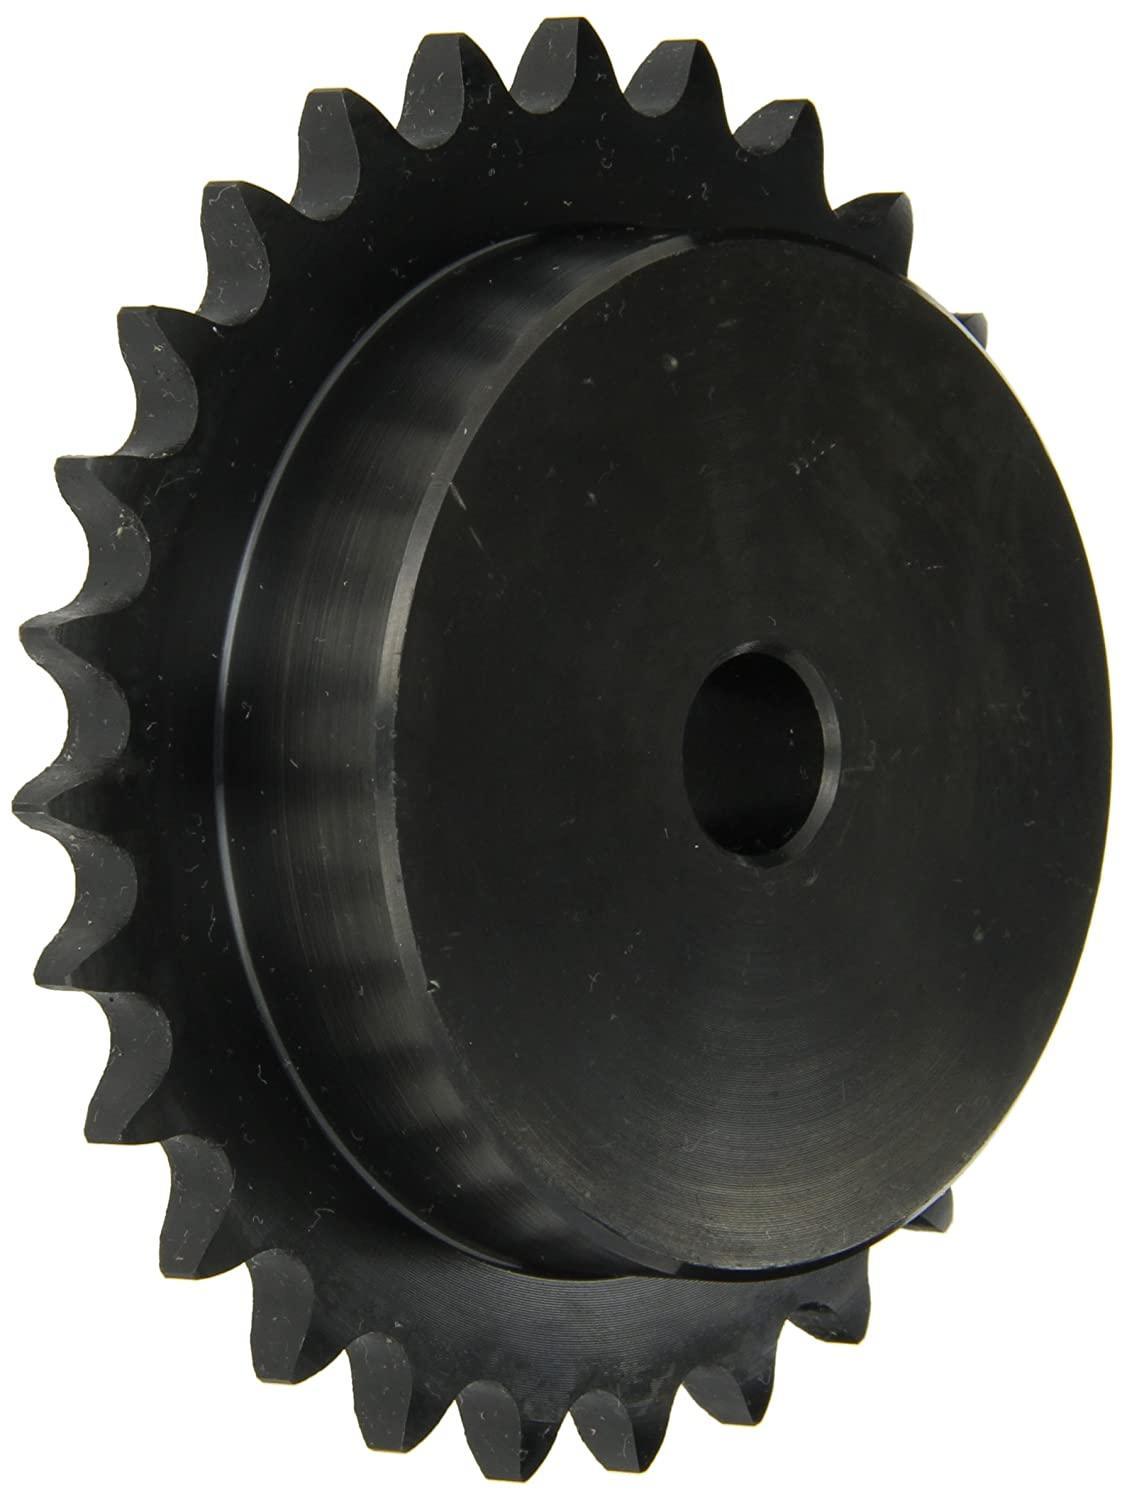 25B18 Roller Chain Sprocket With Stock Bore - Forces Inc